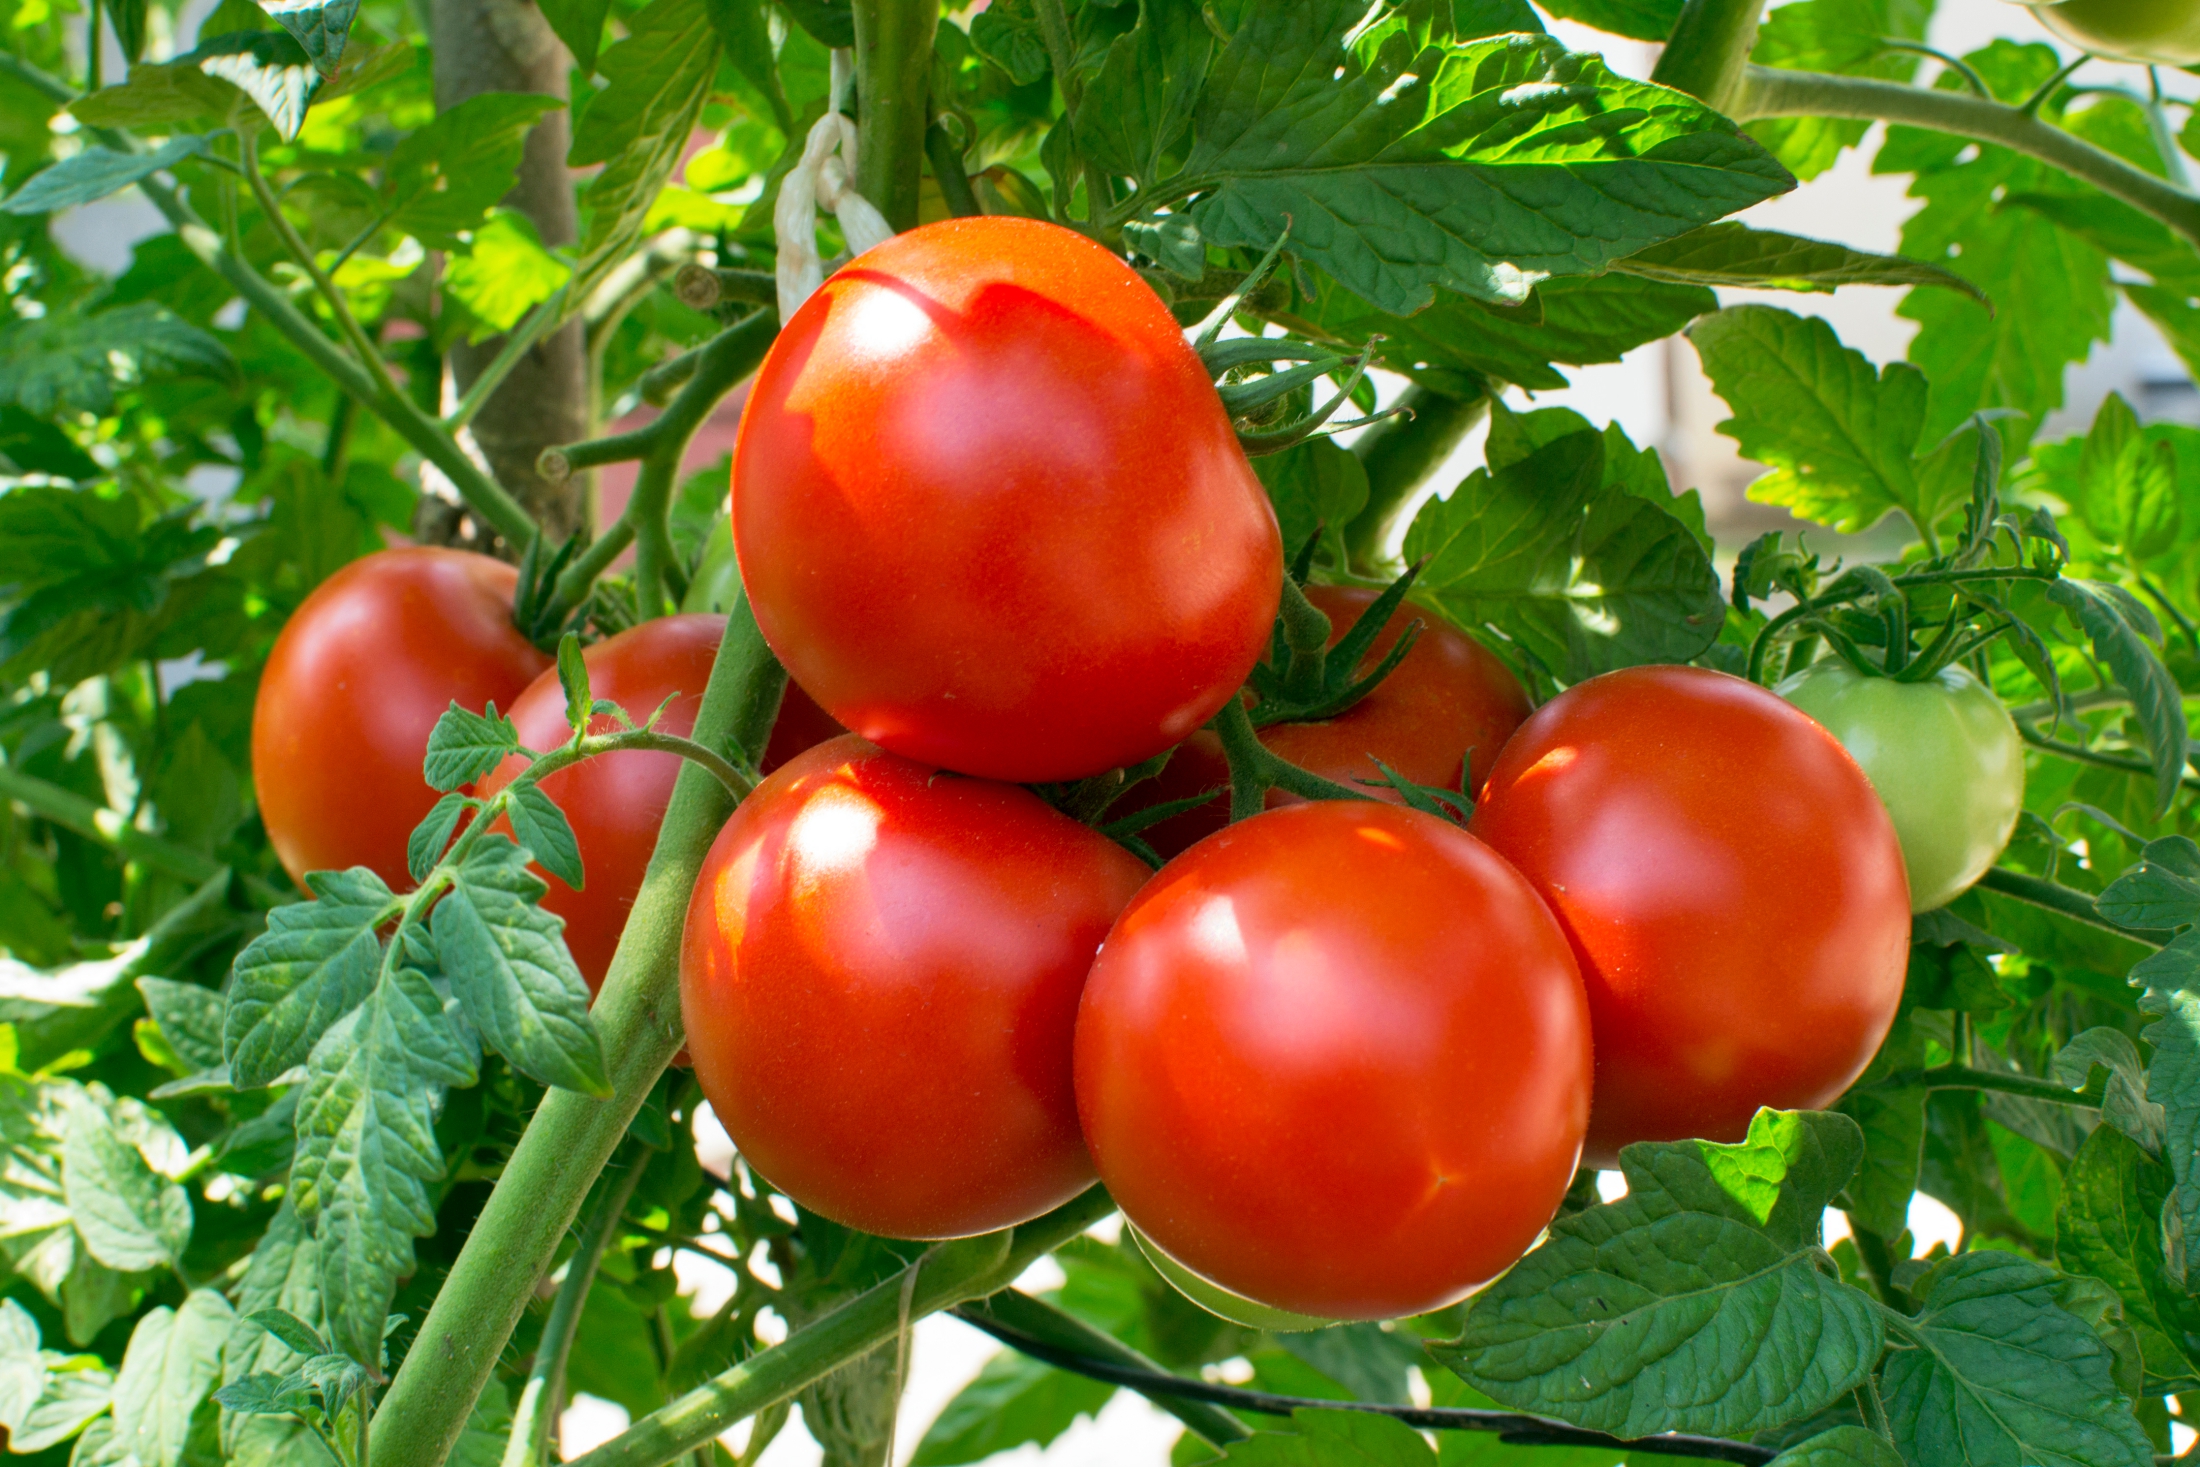 Growing Tomatoes From Planting To Harvest The Old Farmer S Almanac,Can I Freeze Mushrooms